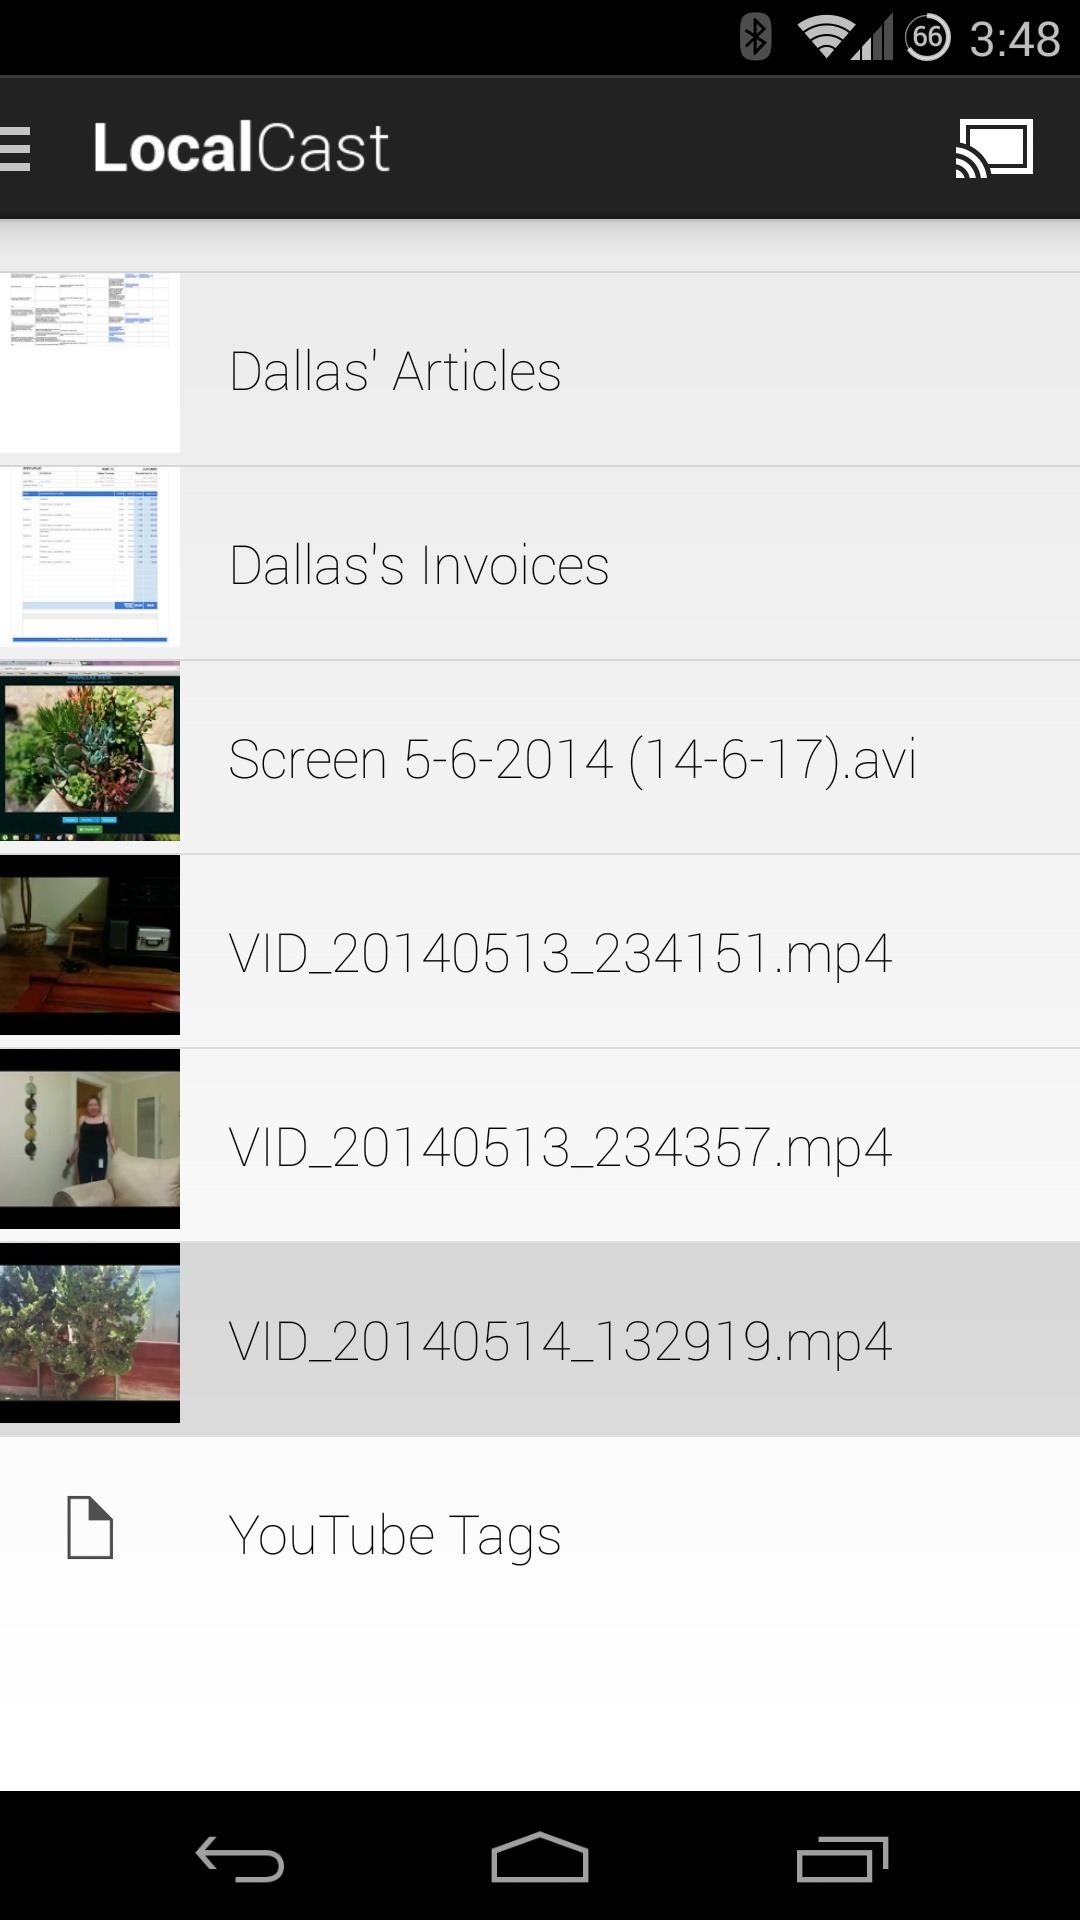 How to Cast Videos from Google Drive to Your TV with Chromecast